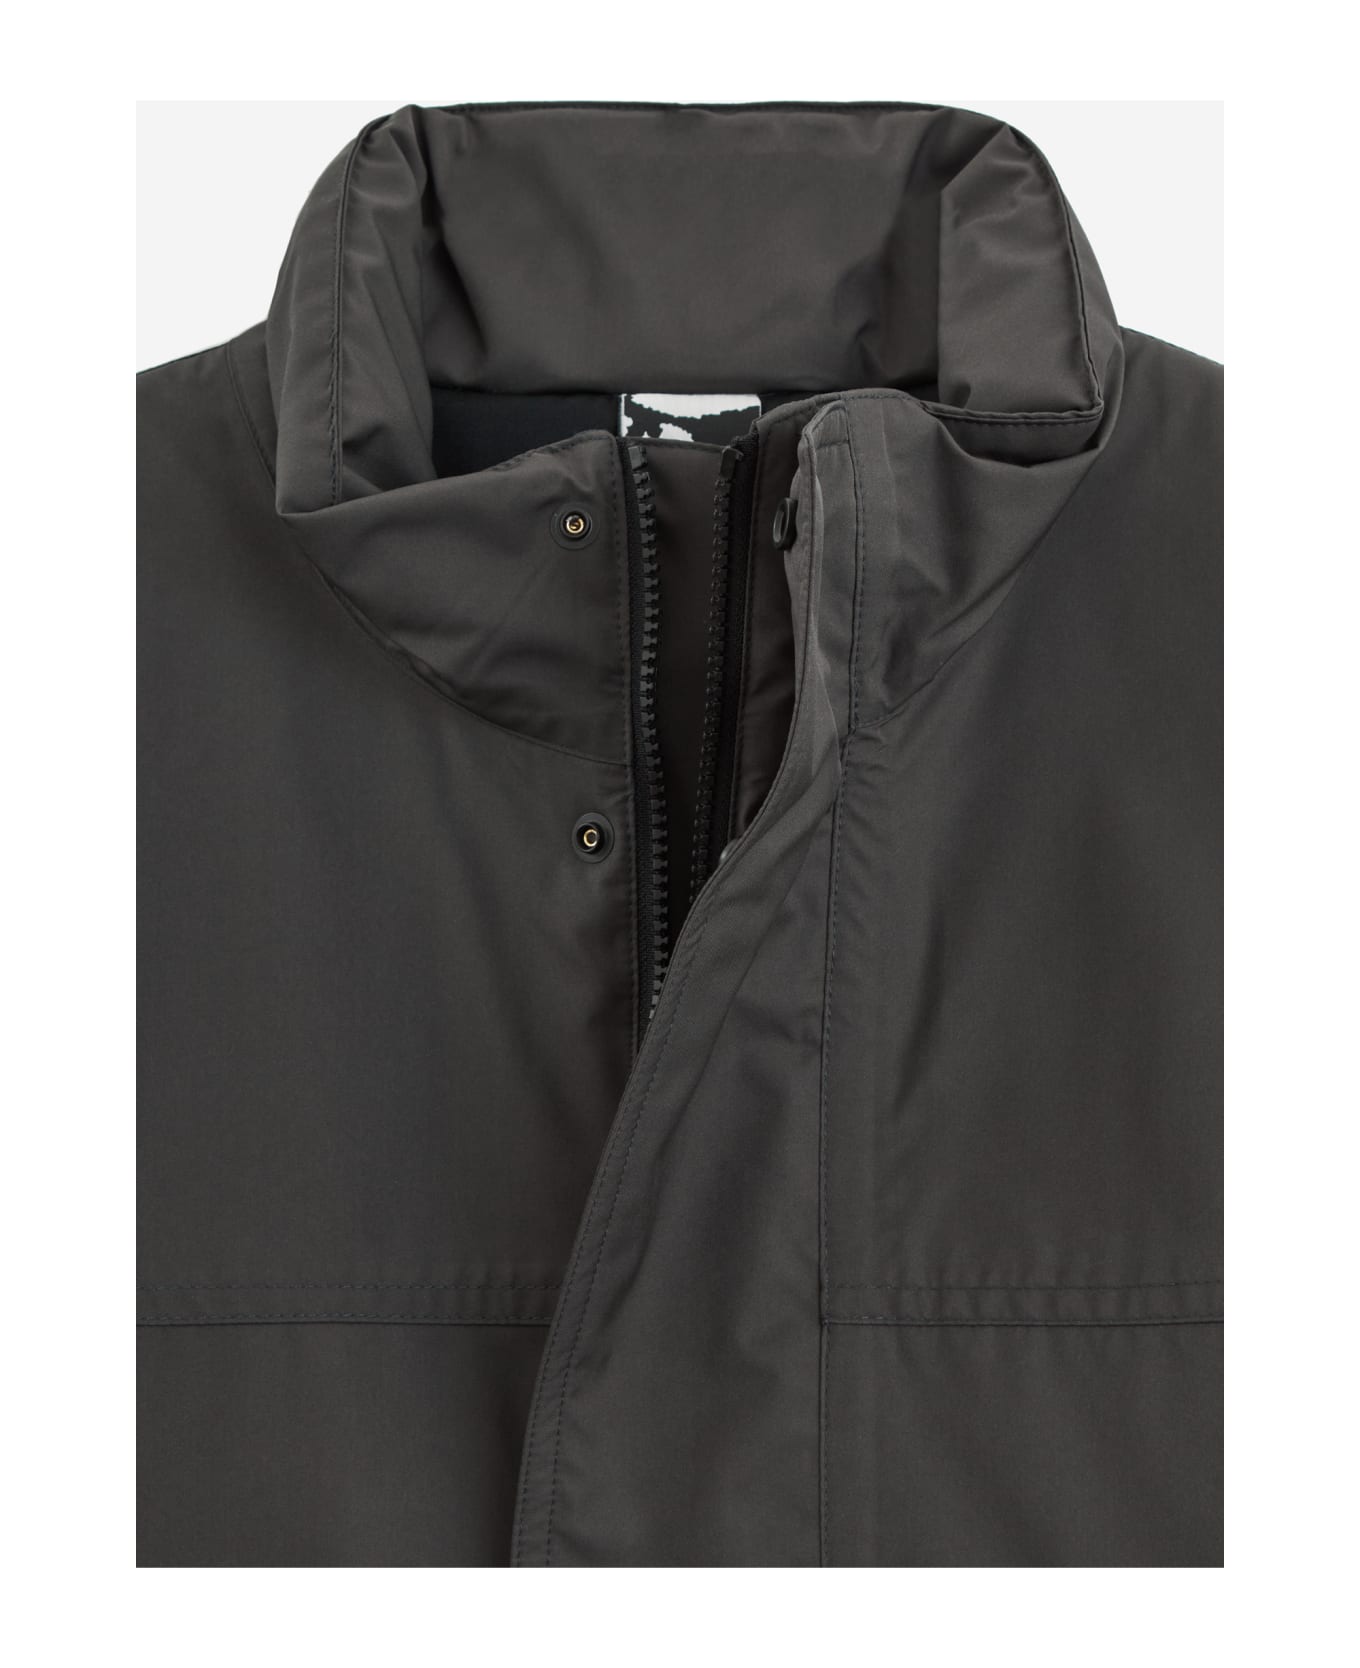 GR10K Insulated Padded Jacket - Coal grey